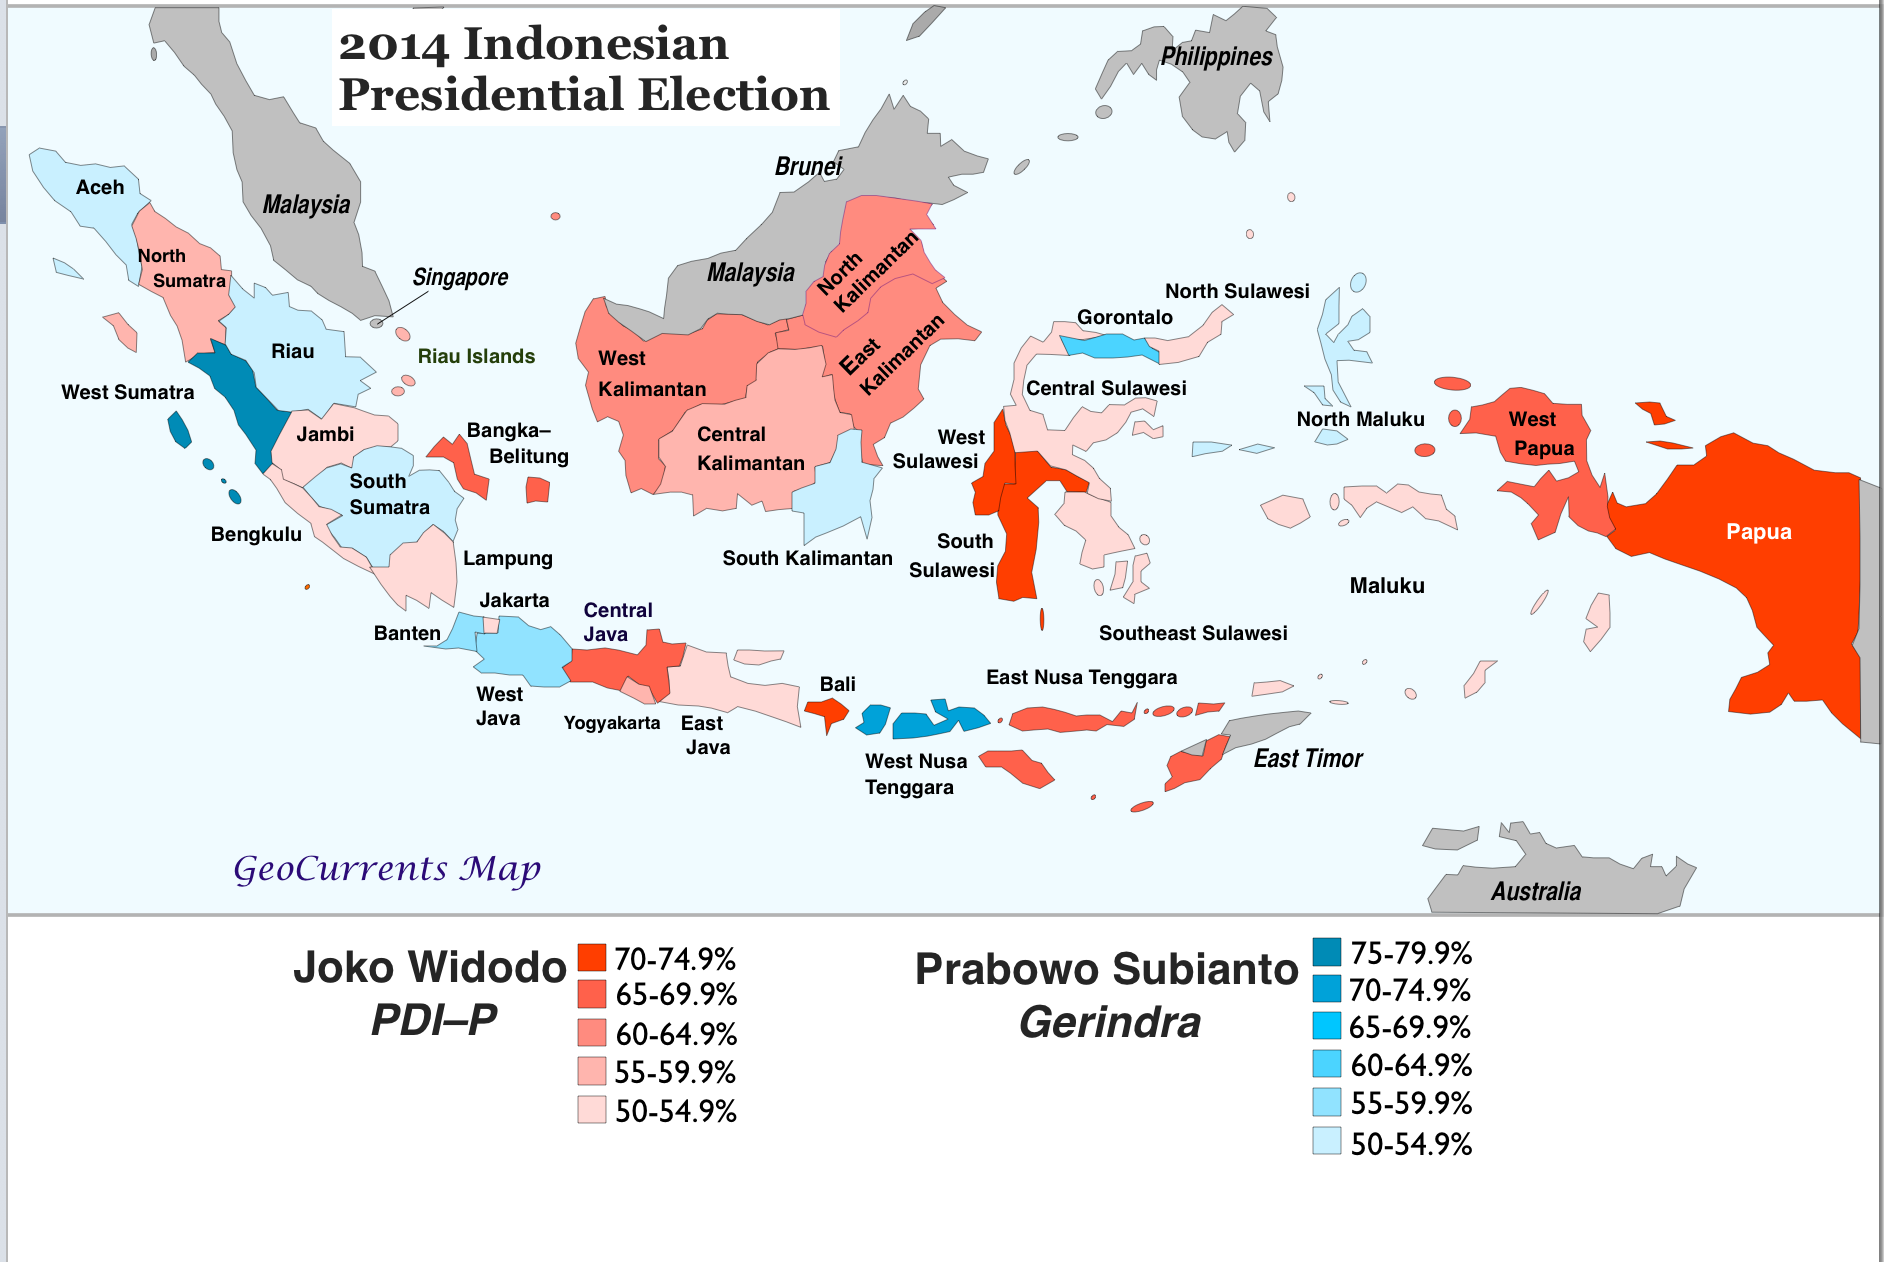 The mindboggling challenge of Indonesia’s election logistics